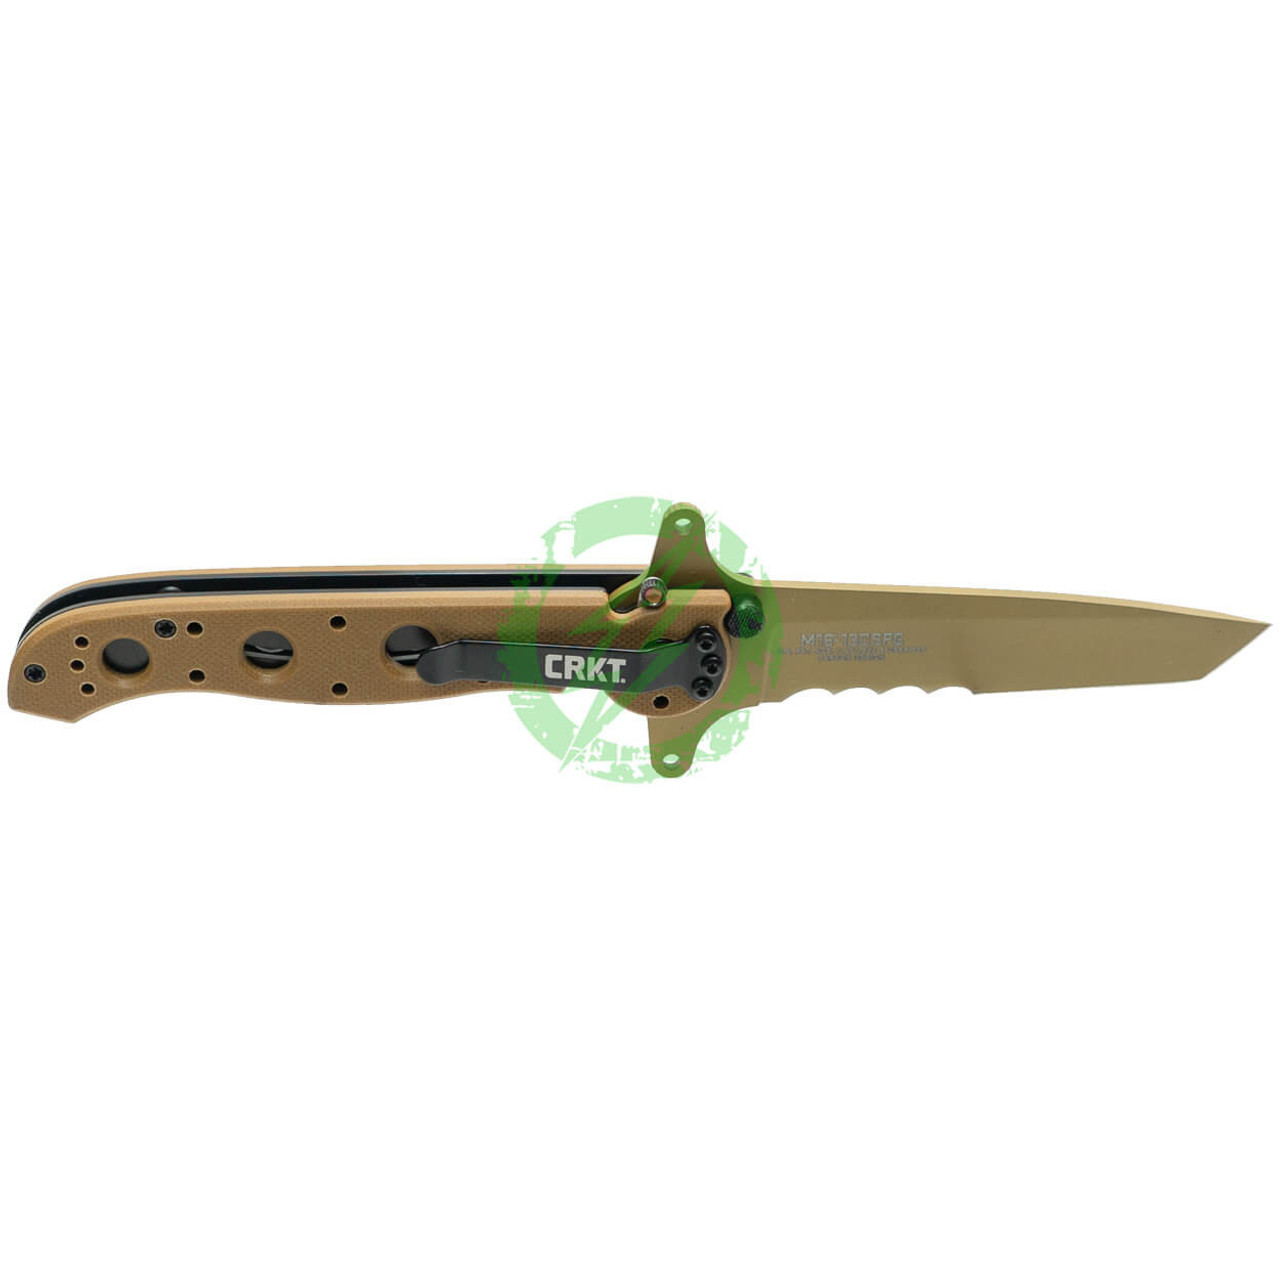 CRKT (Columbia River Knife Tool) CRKT M16-13DSFG Desert with Veff Serrations Folding Blade Knife with 1.4116 Titanium Nitride Blade & G10 Handle 